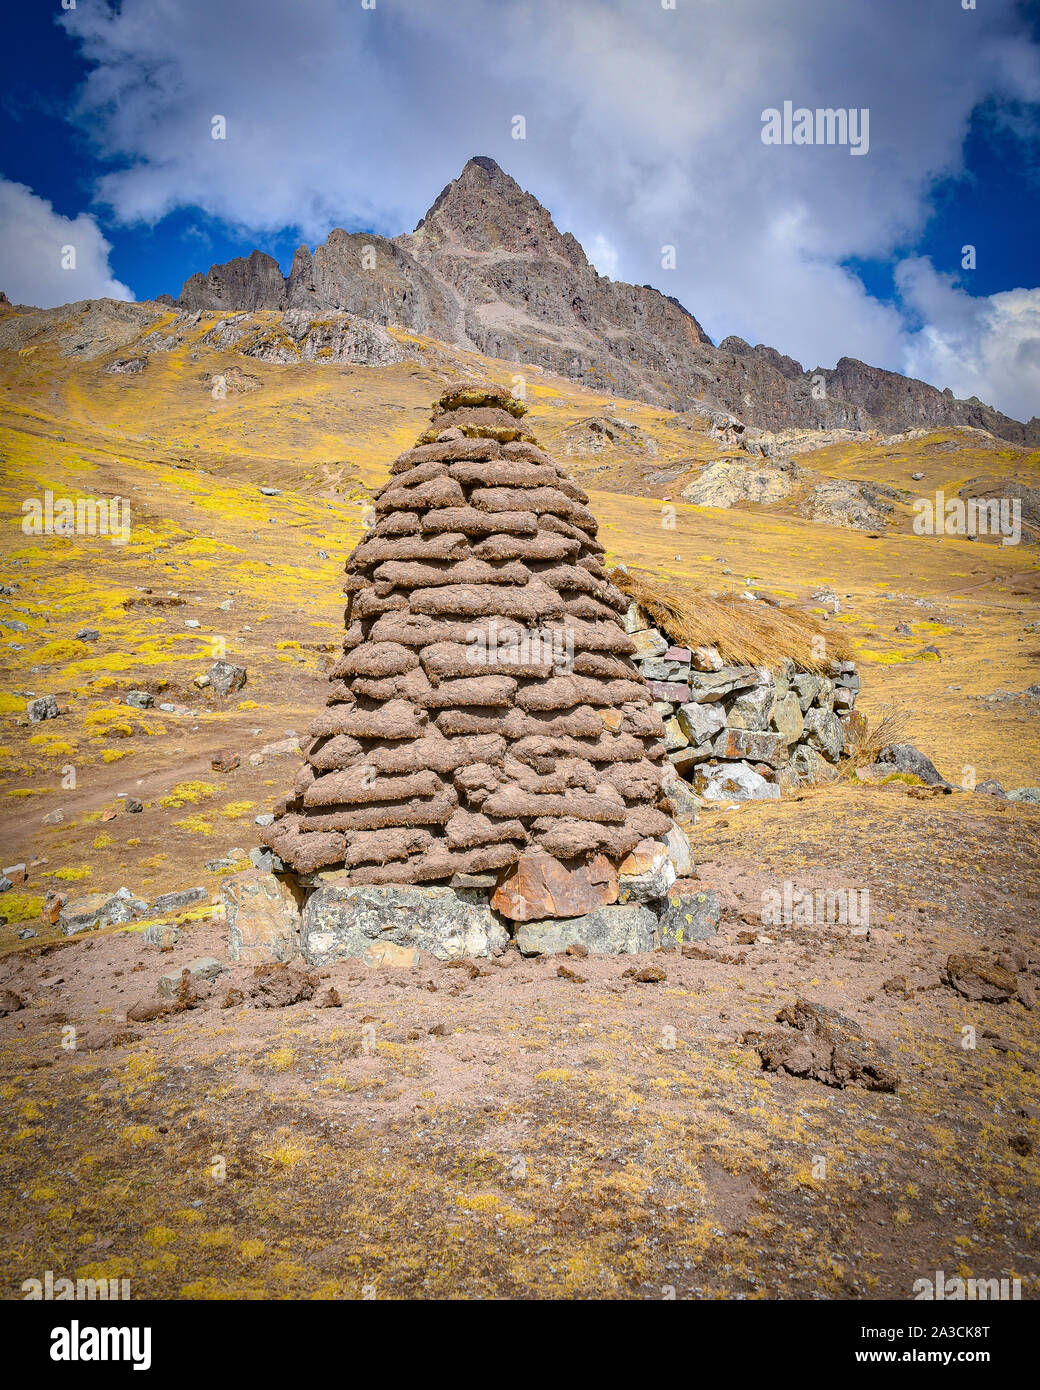 A dirt mound used for drying llama and alpaca waste for use as fuel and fertilizer in the high Andes. Ausungate, Cusco, Peru Stock Photo